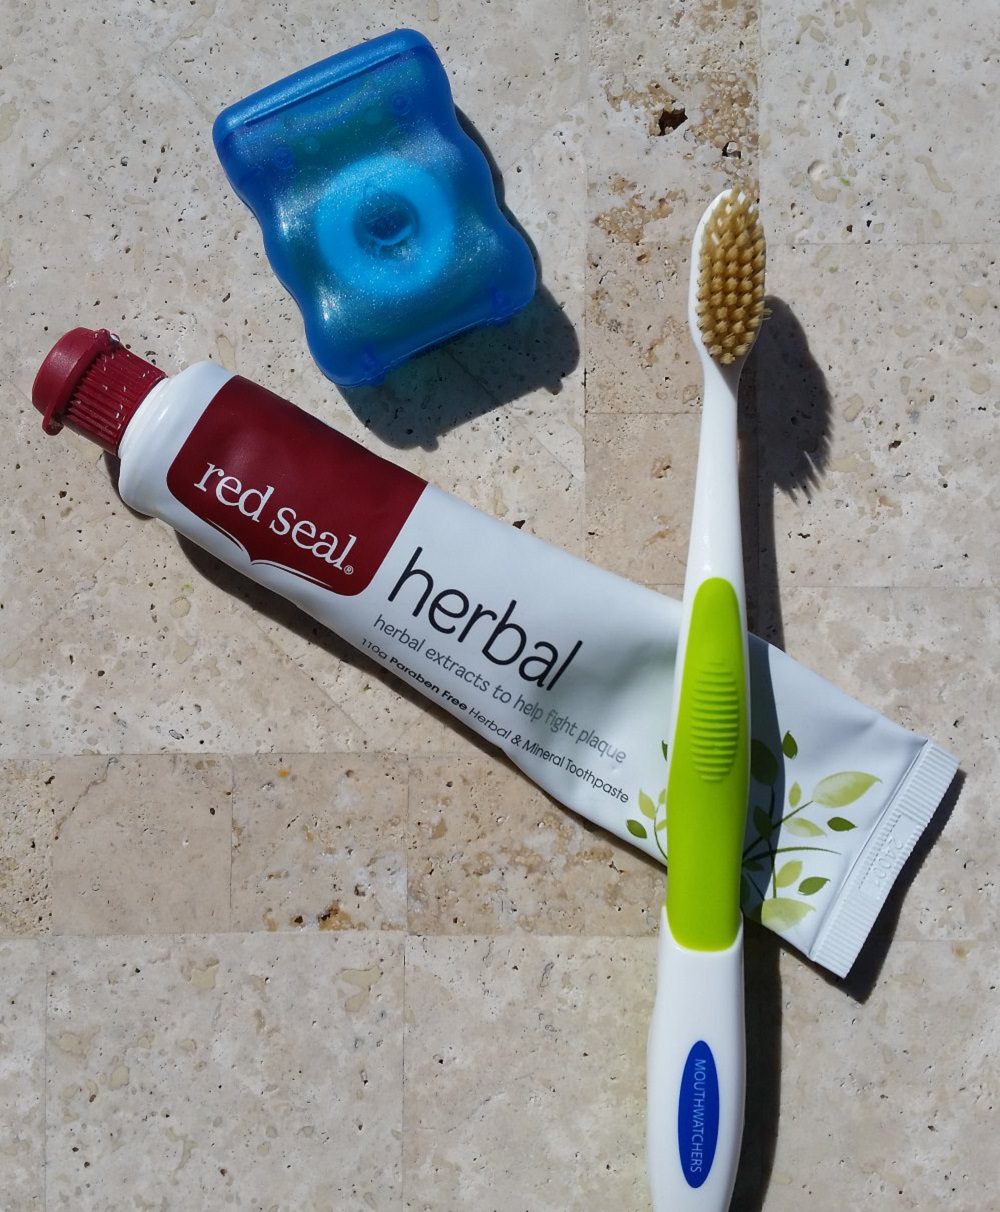 Mouthwatchers toothbrush with other hygiene products